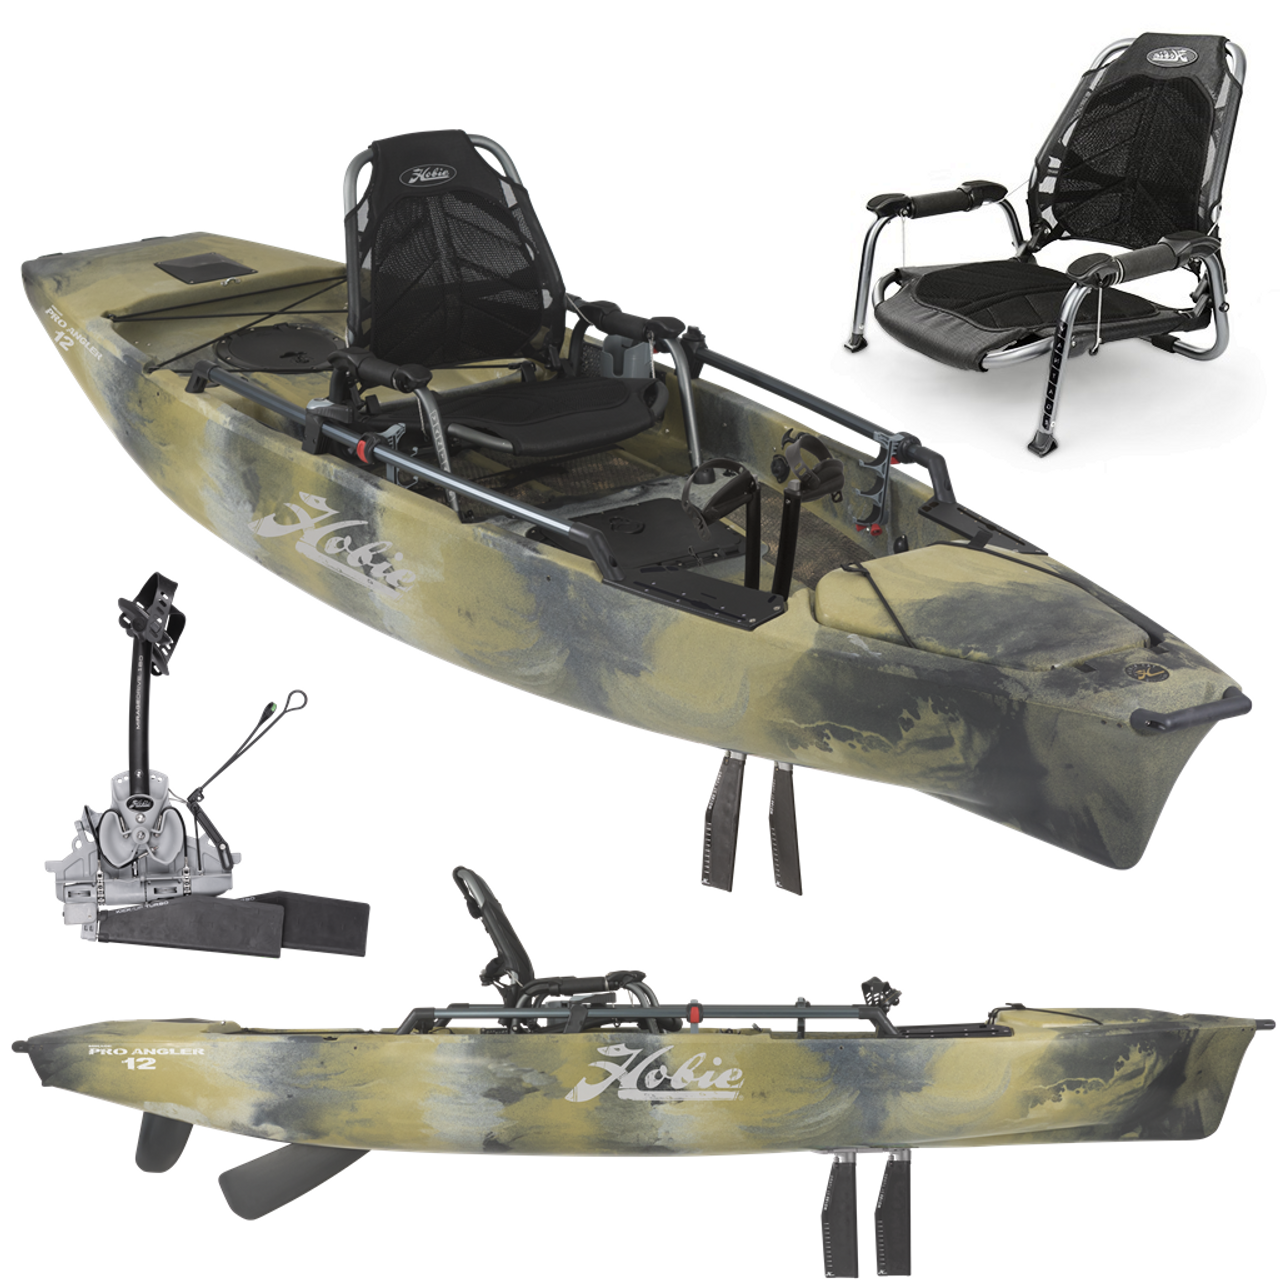 https://cdn11.bigcommerce.com/s-f3xbgyp2hq/images/stencil/1280x1280/products/2582/20780/Hobie_Mirage_Pro_Angler_12_Pedal_Drive_Fishing_Kayak_Collage_Kayak_City_Camo__62367.1696964935.png?c=2